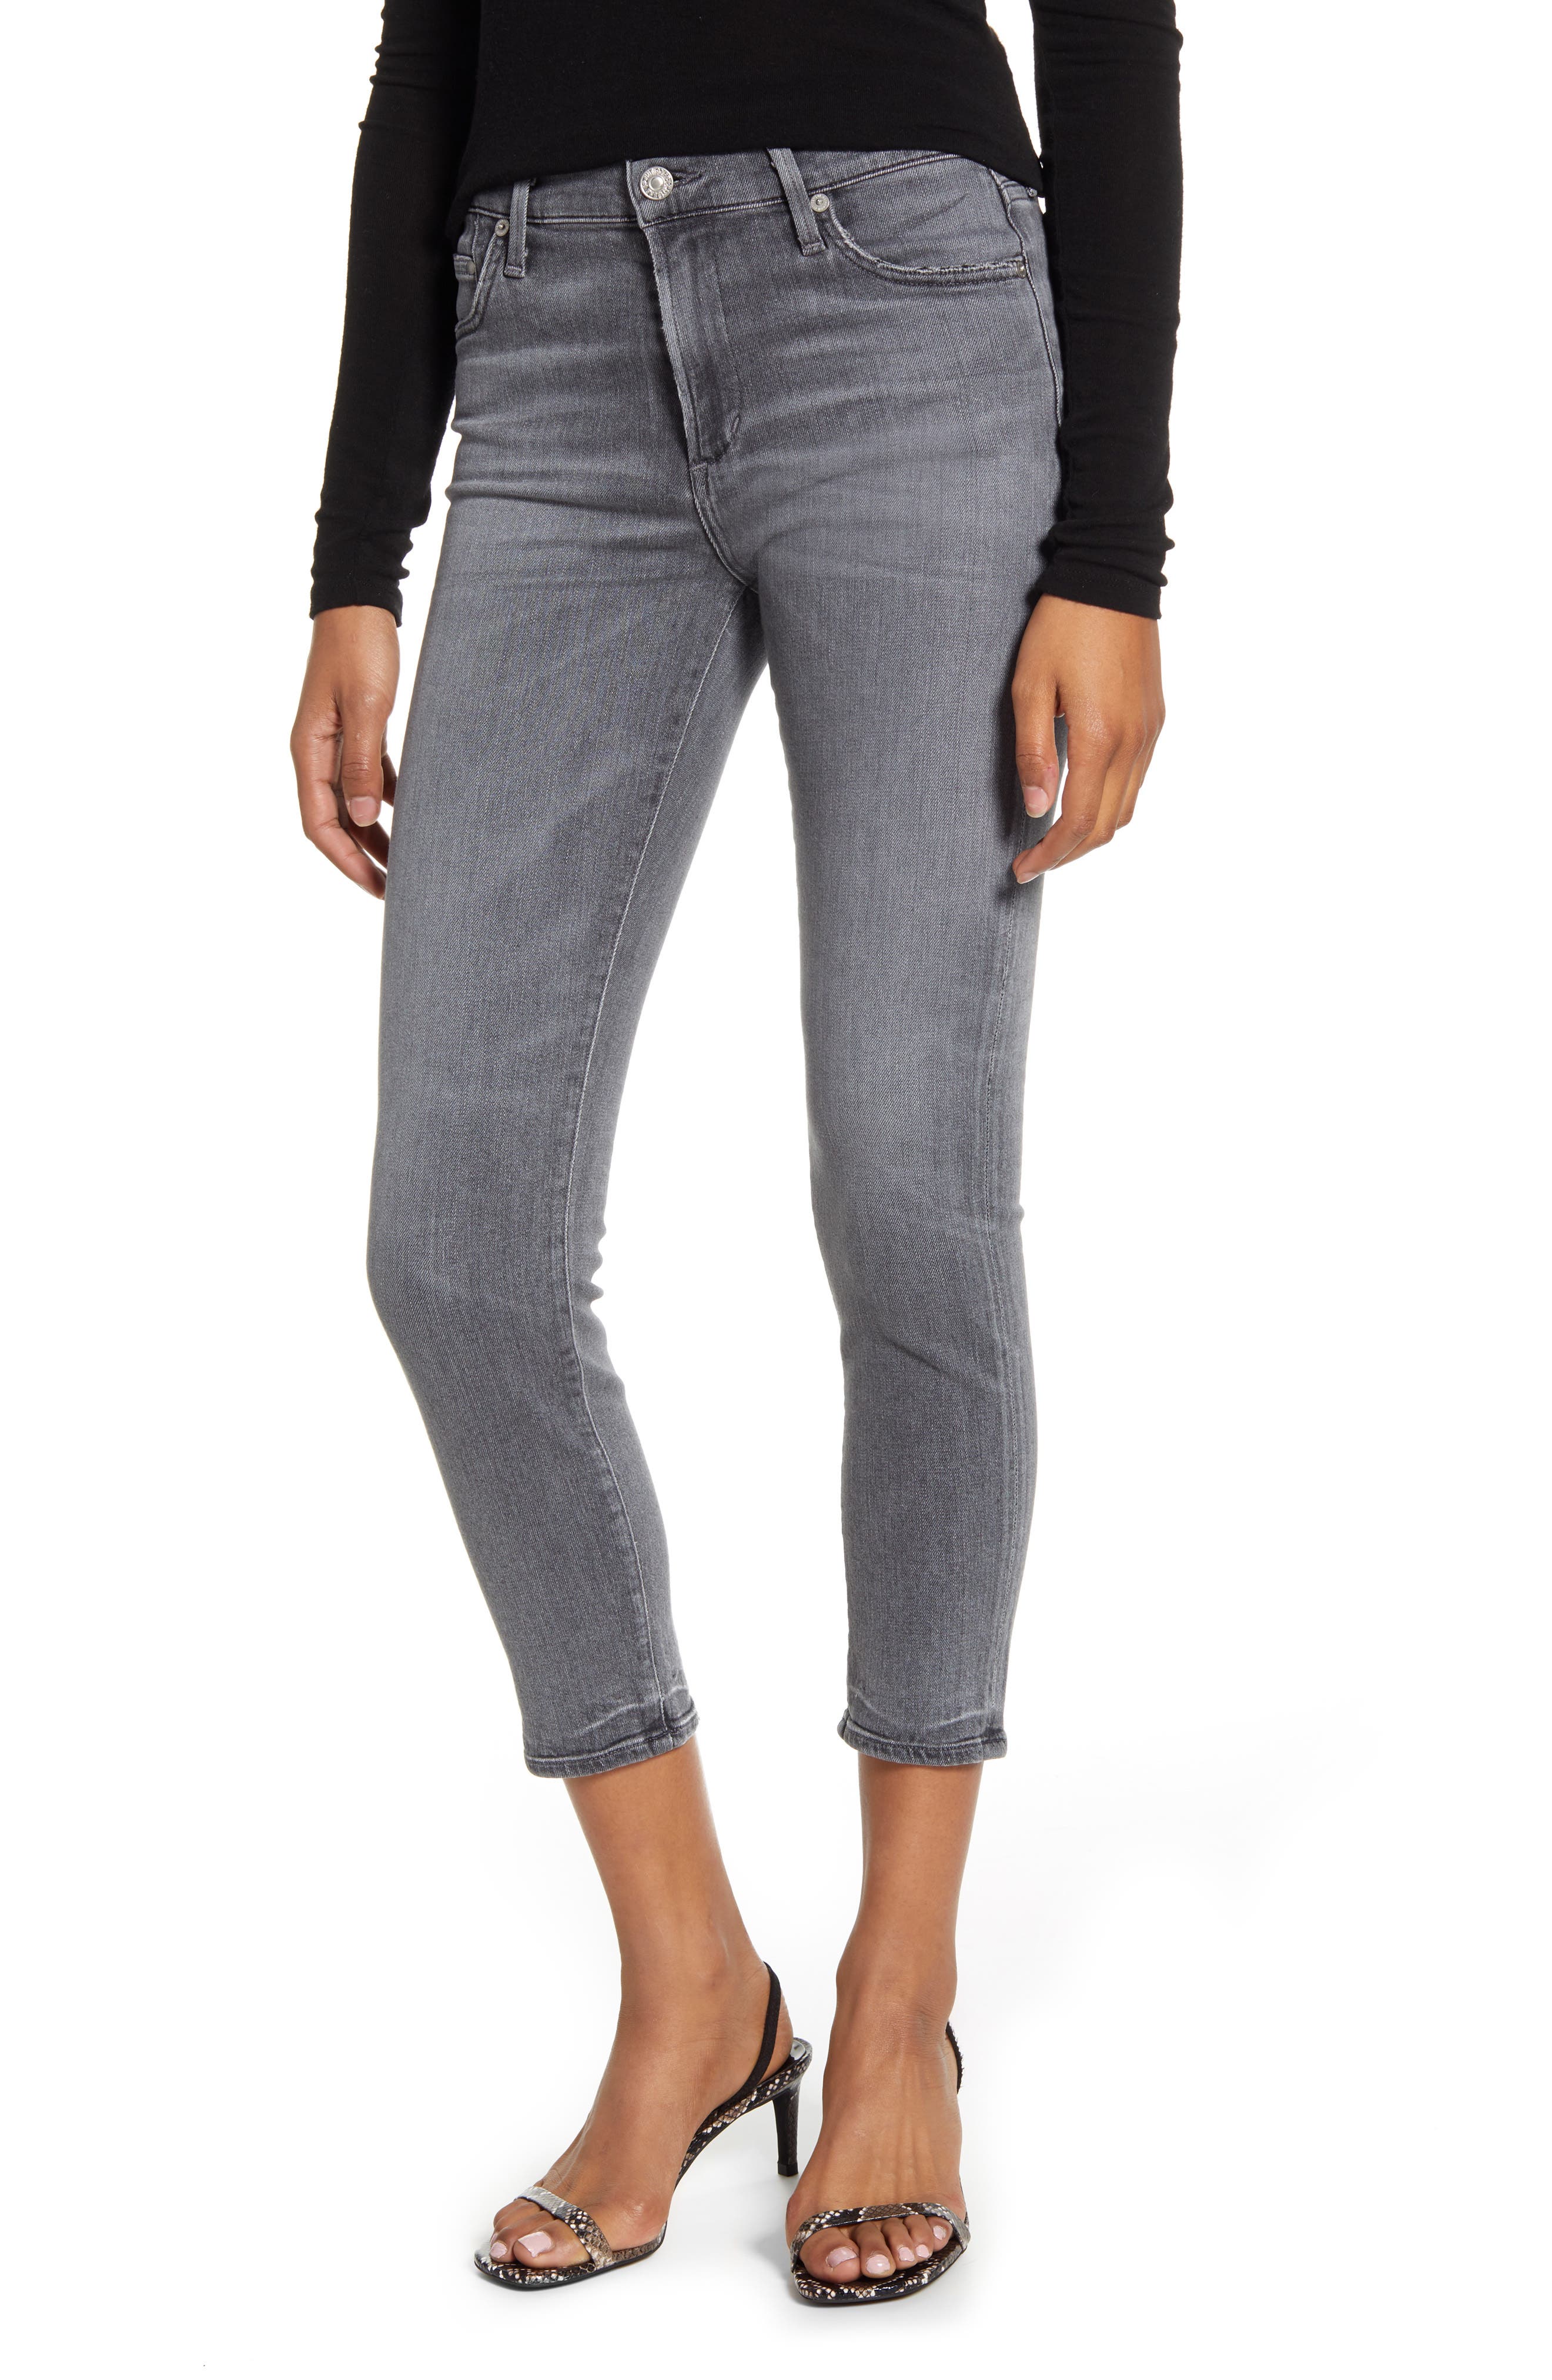 citizens of humanity grey jeans